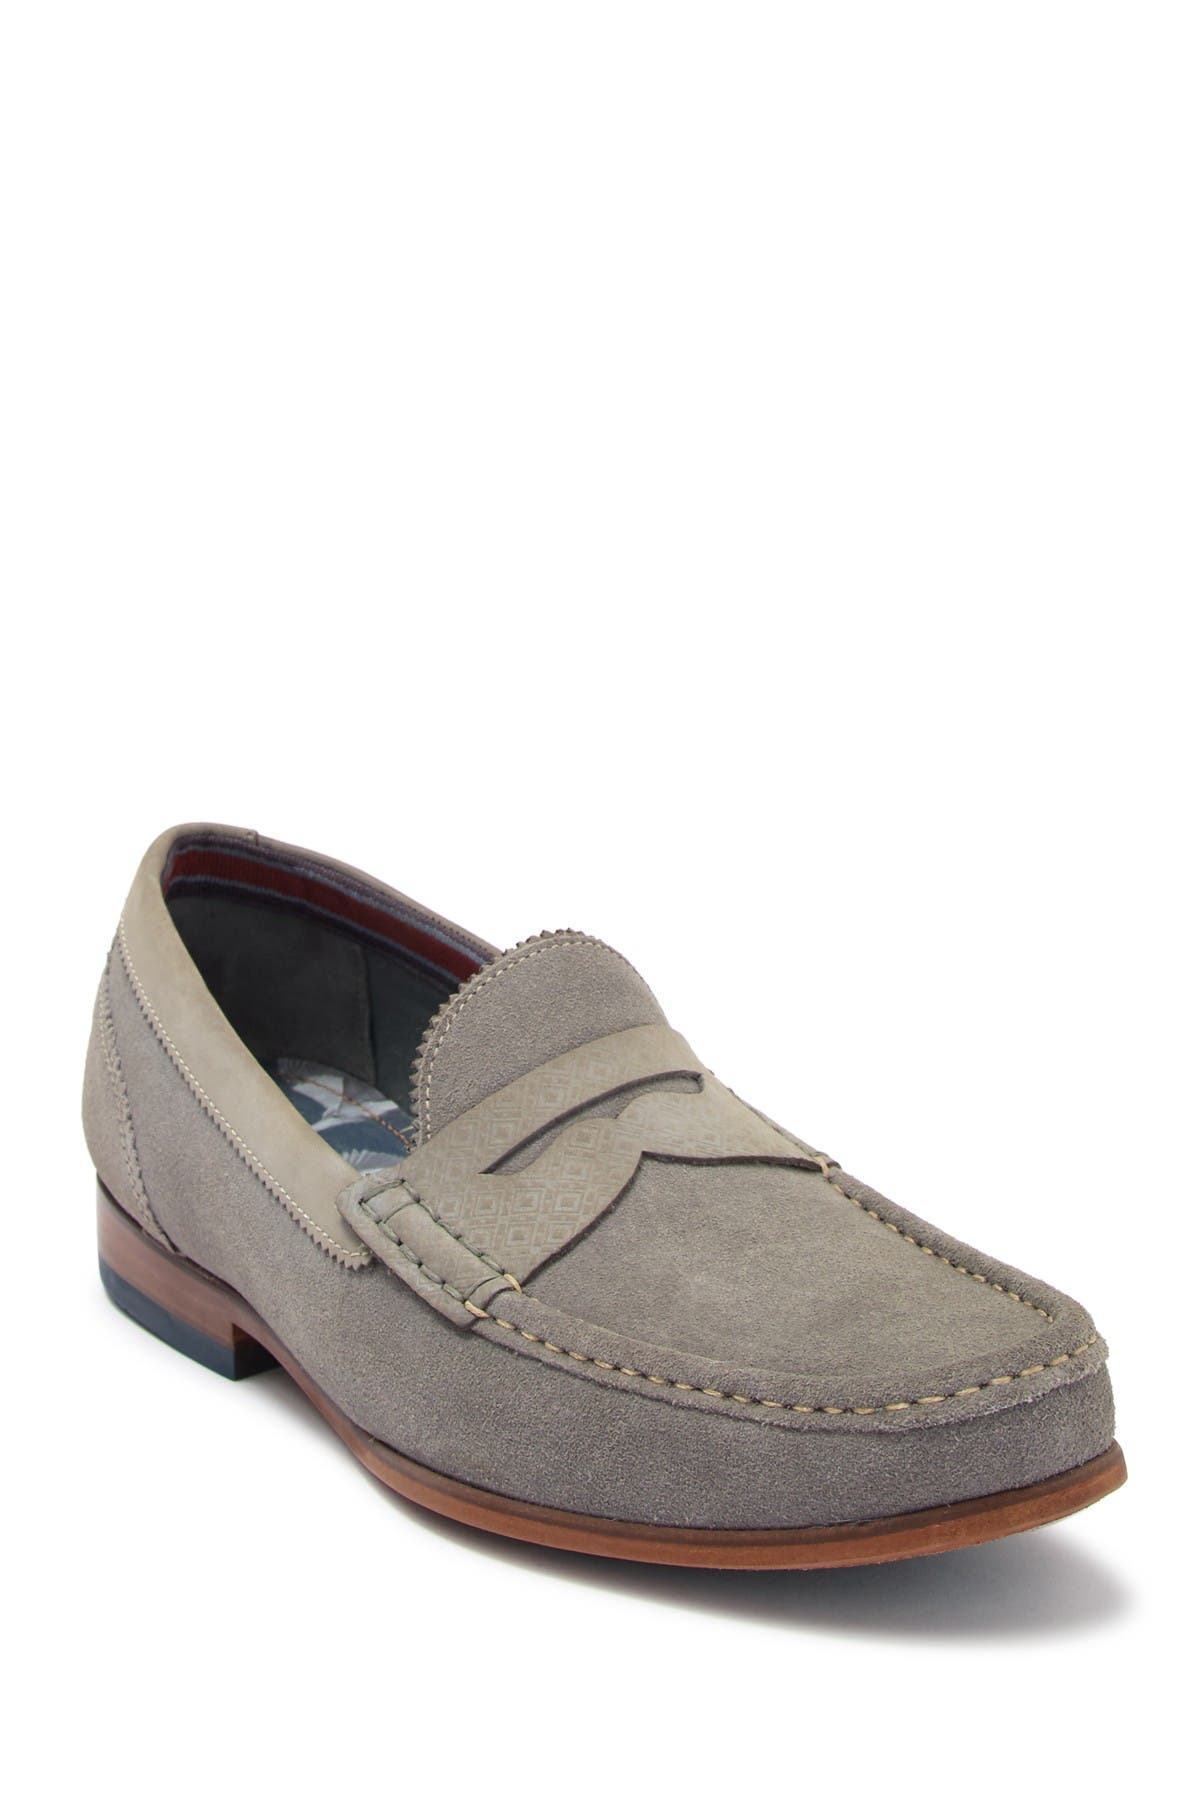 ted baker boys loafers